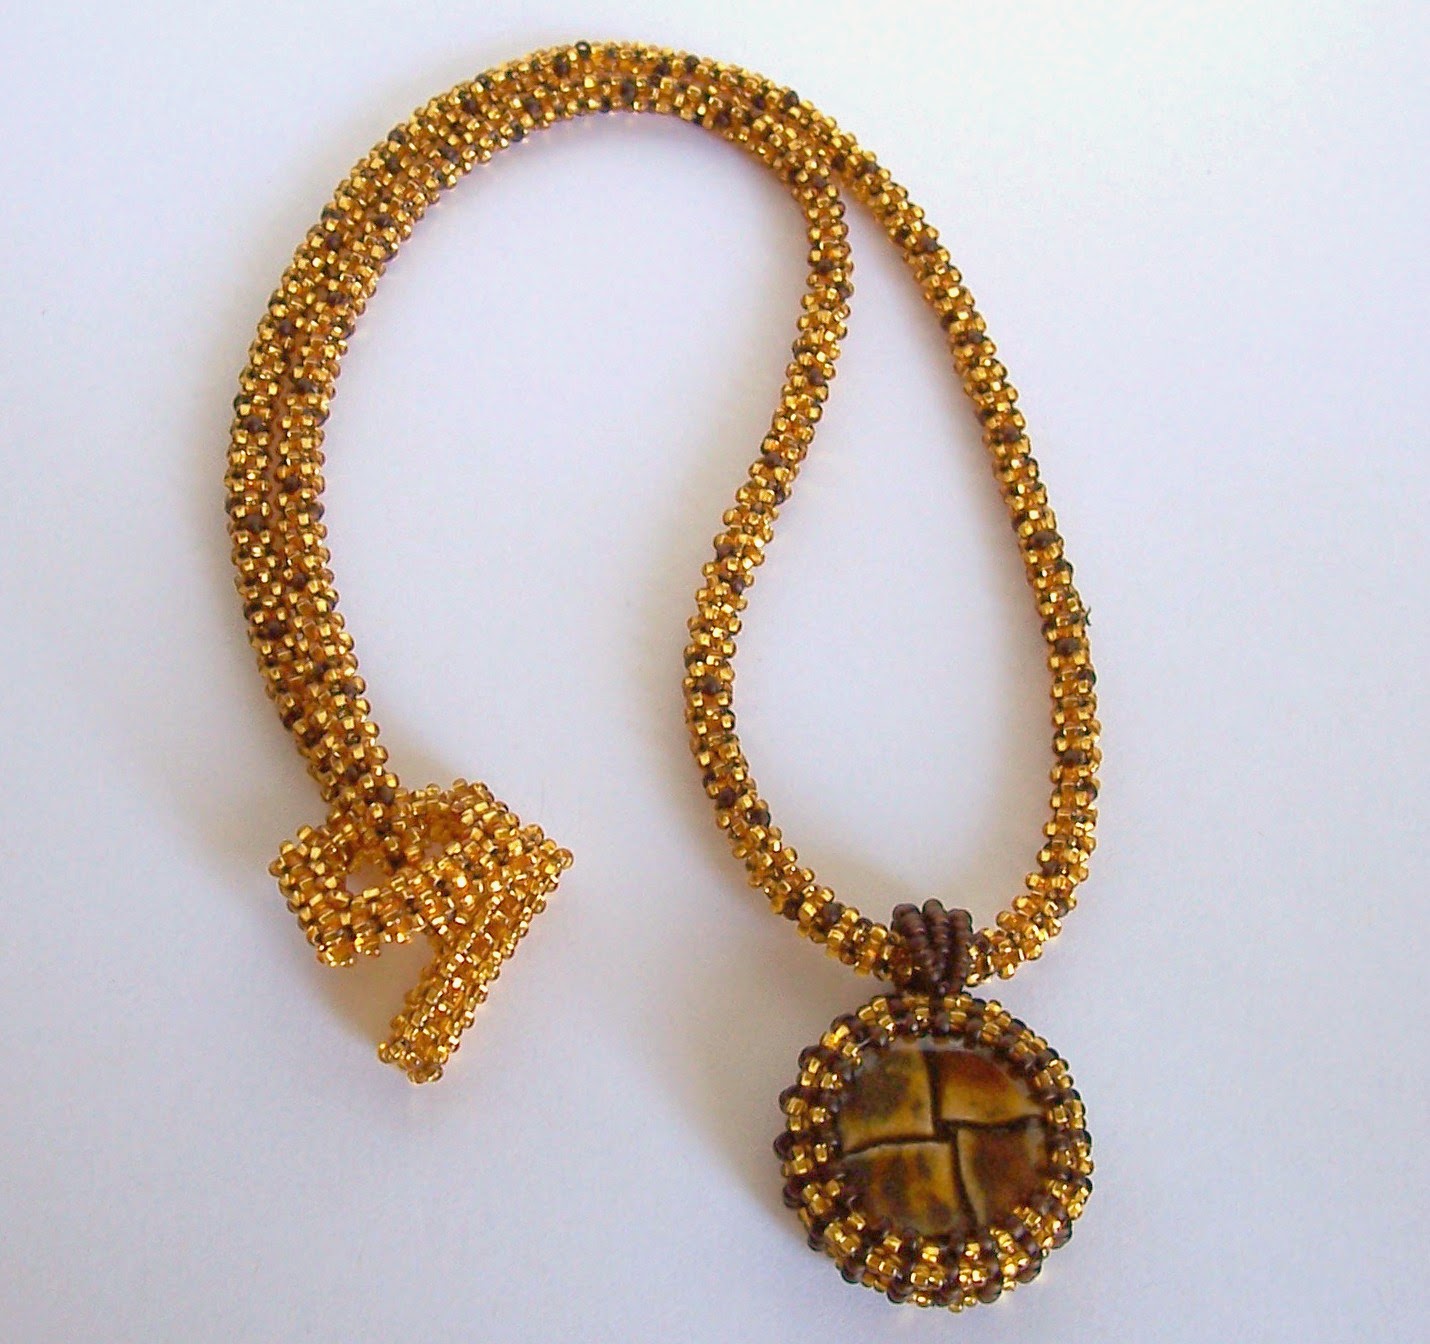 https://www.etsy.com/listing/129452494/gold-dust-beadwoven-necklace-with?ref=shop_home_active_7